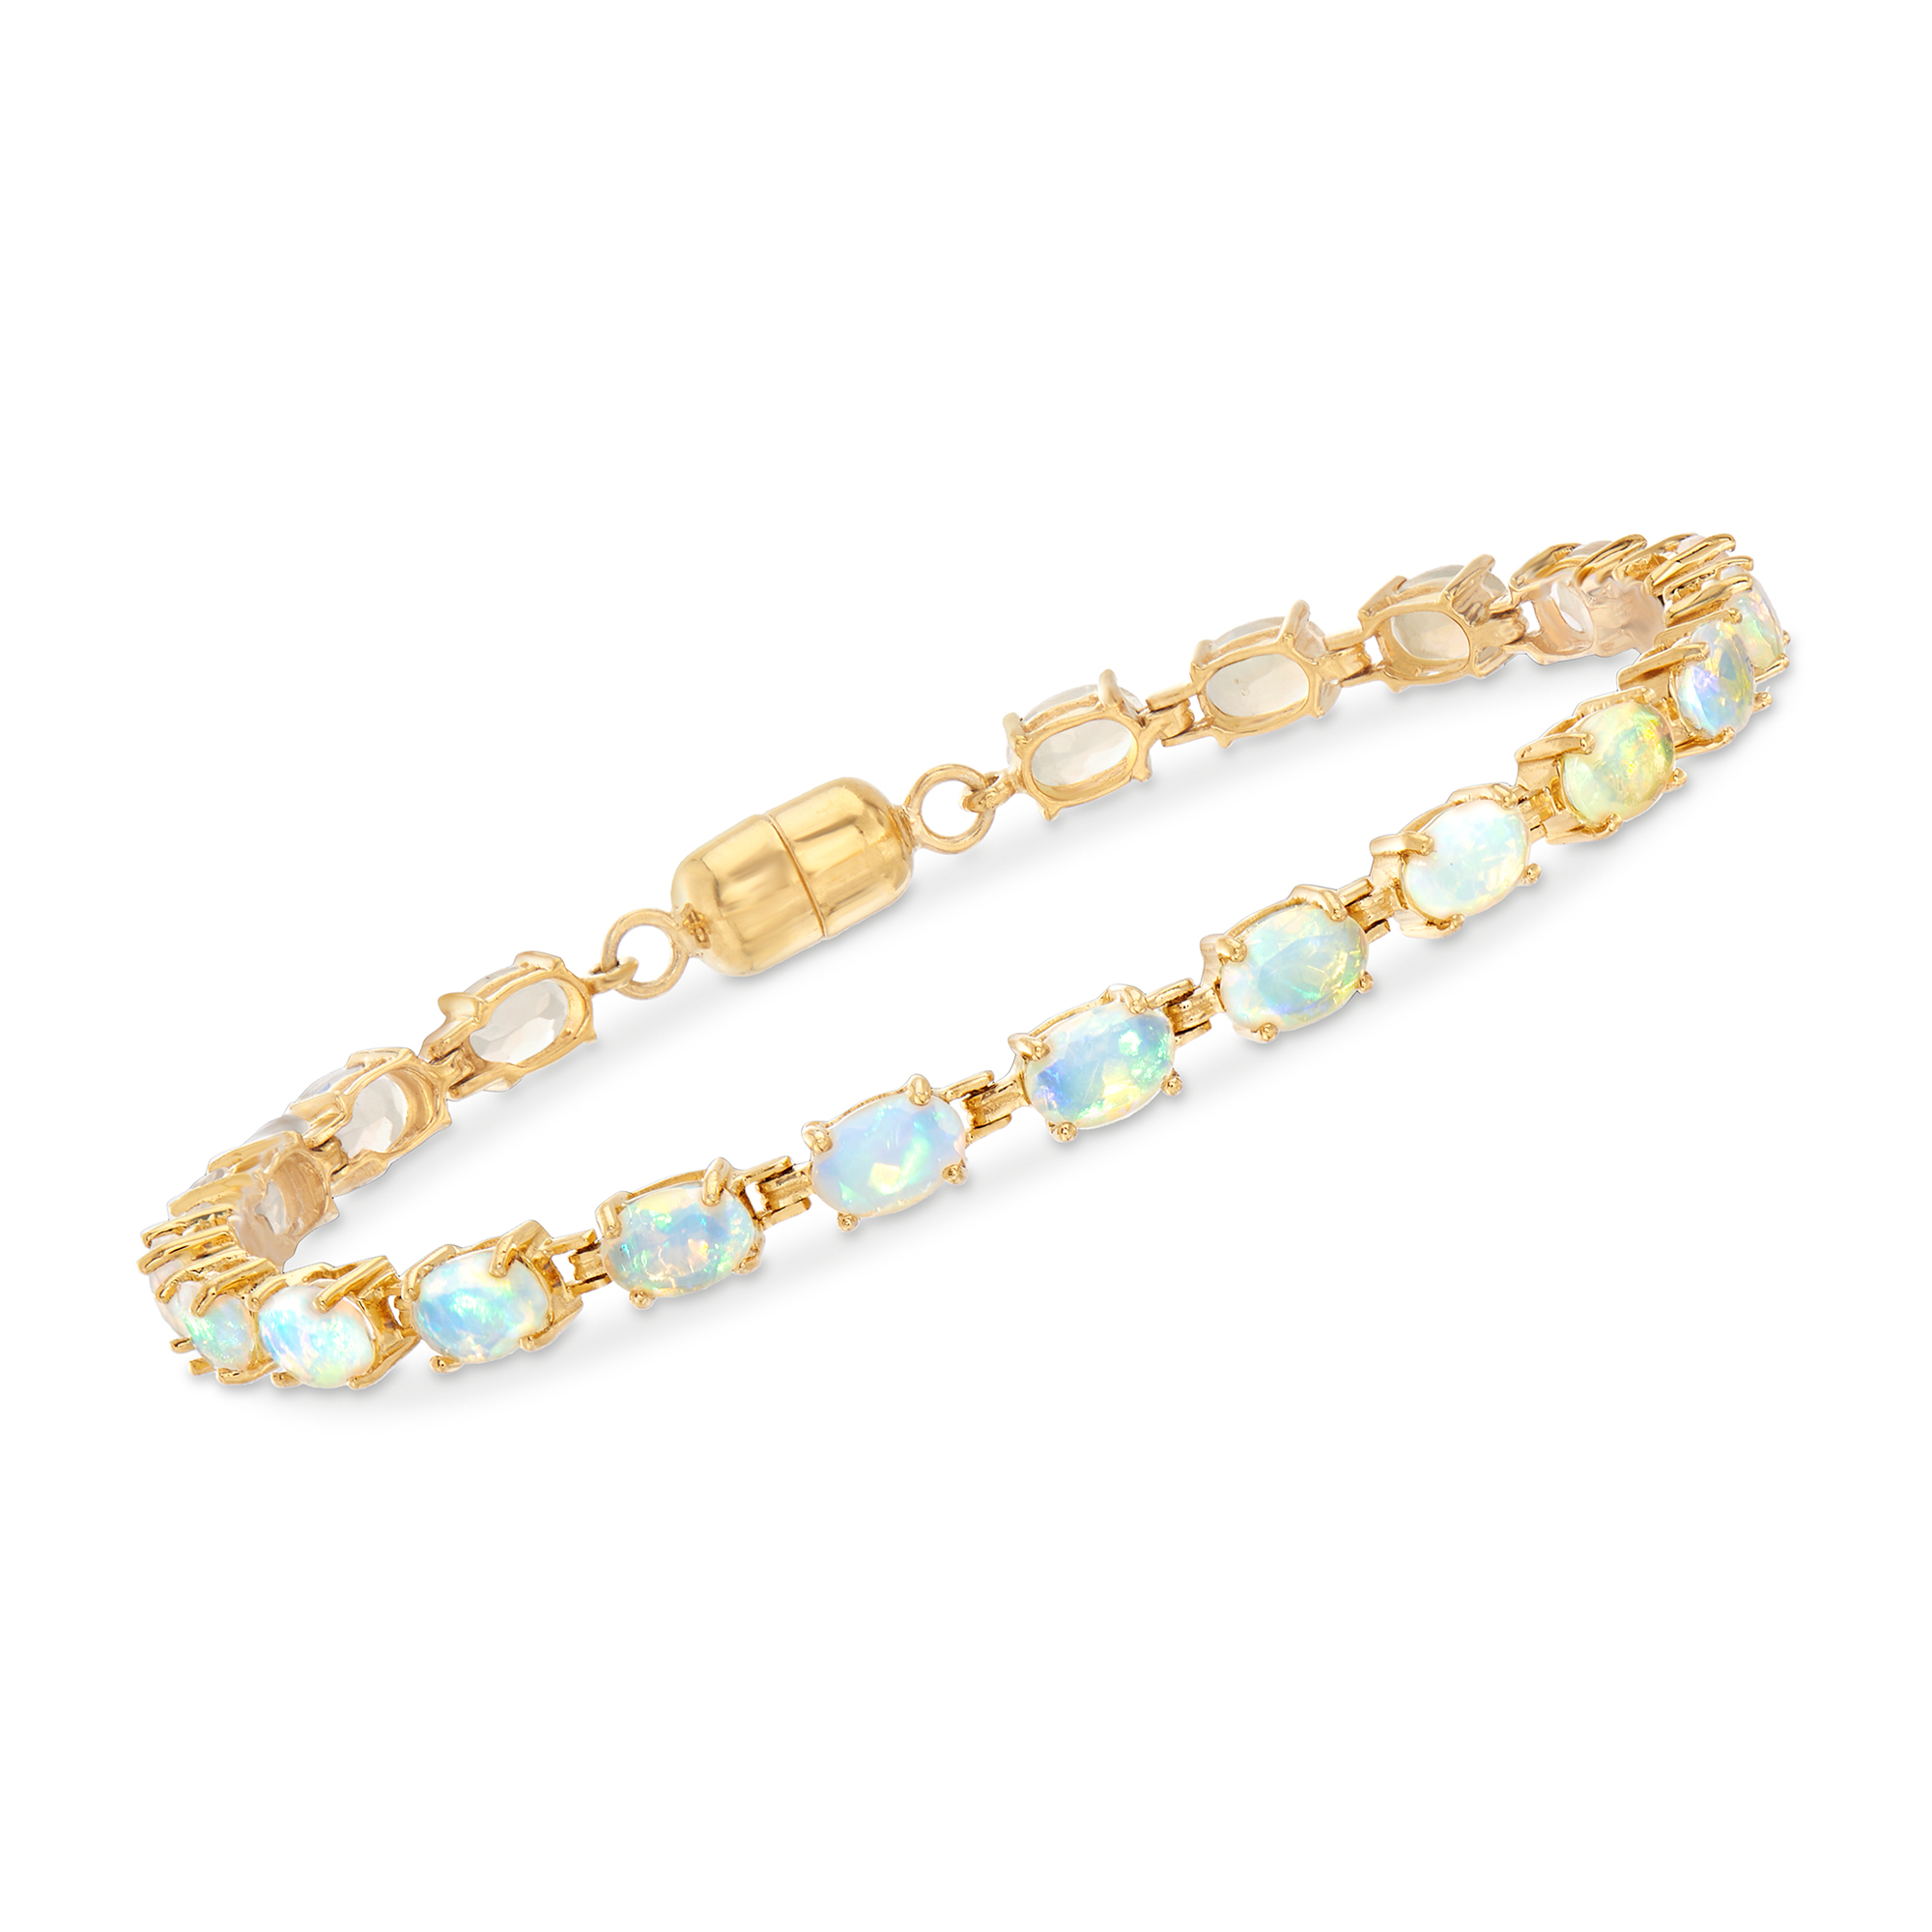 Details about   Oval Natural Ethiopian Opal & Sapphire Gemstone Solid 925 Silver Tennis Bracelet 